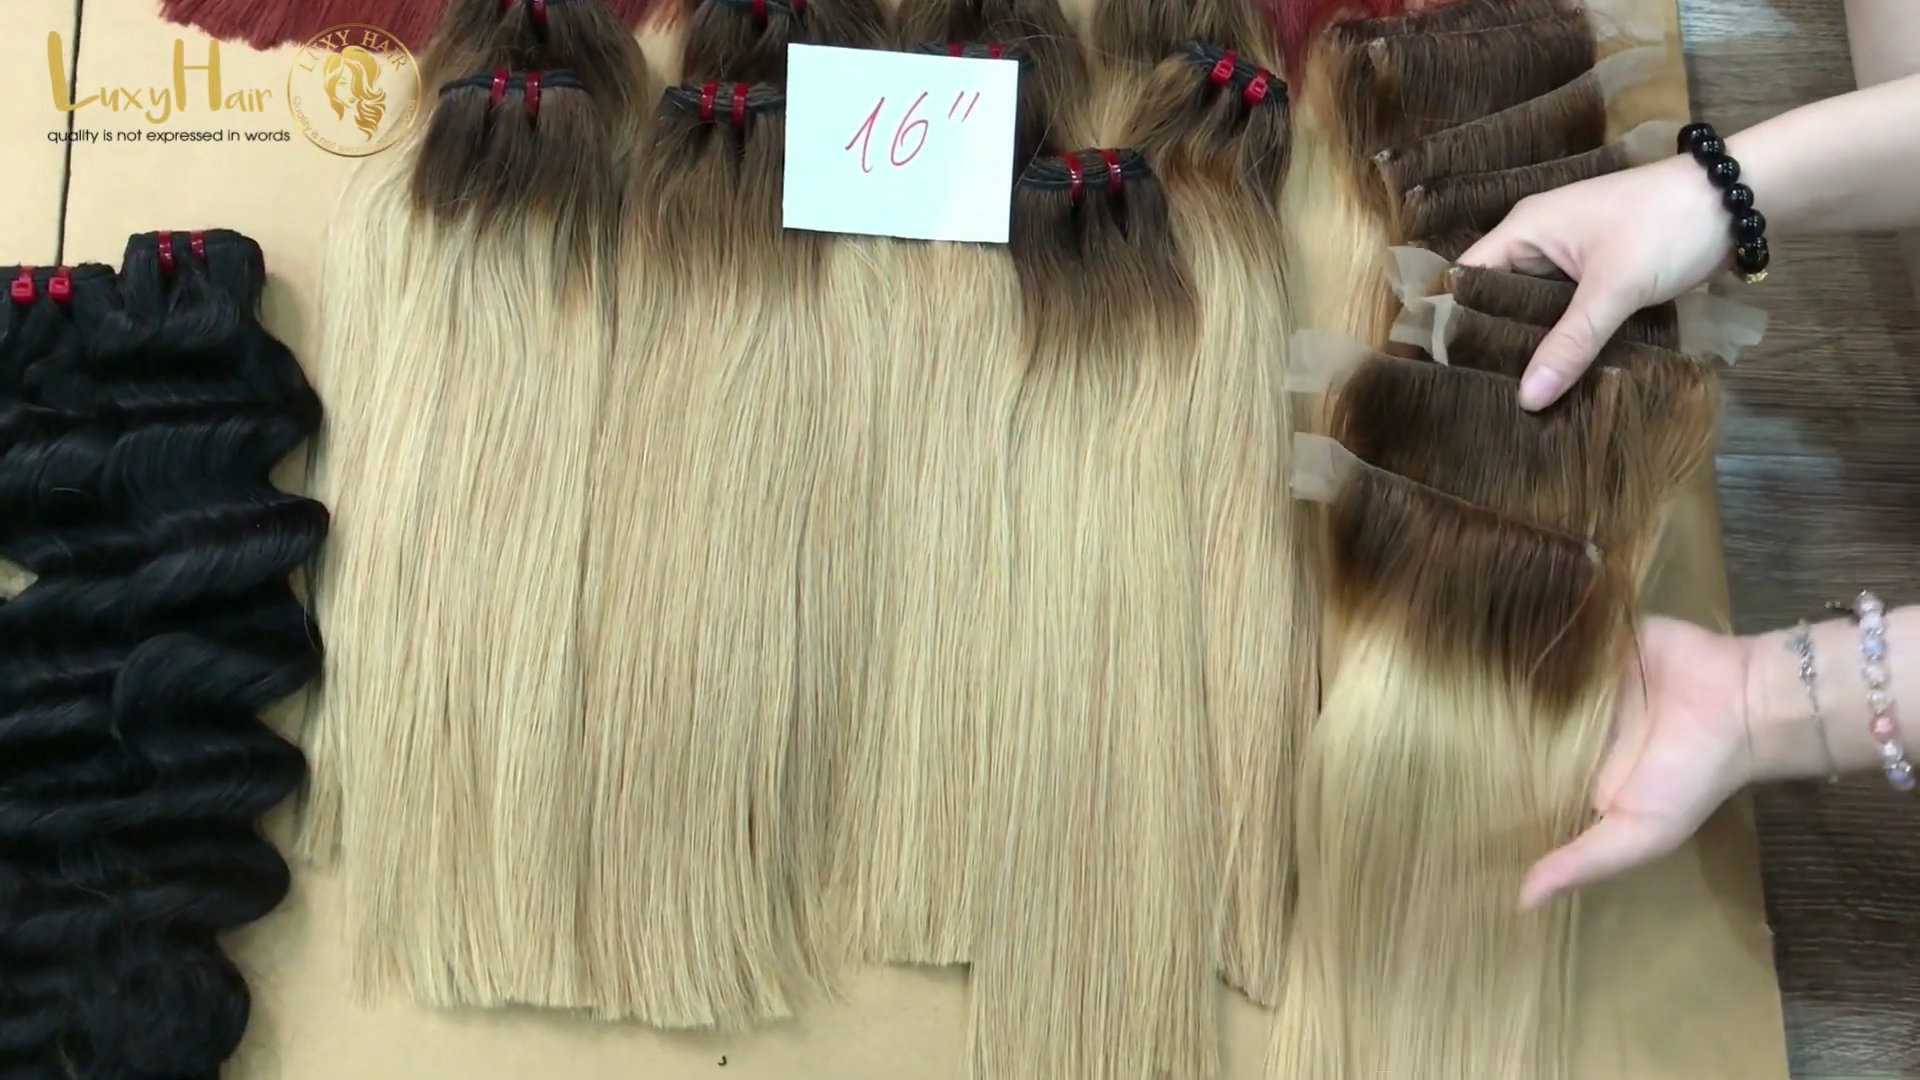 Get Best Human Hair Wig Bundles in Vietnam. the best quality and wholesale human hair supplier in Vietnam. LuxyHair supply hair to all customers all over the world